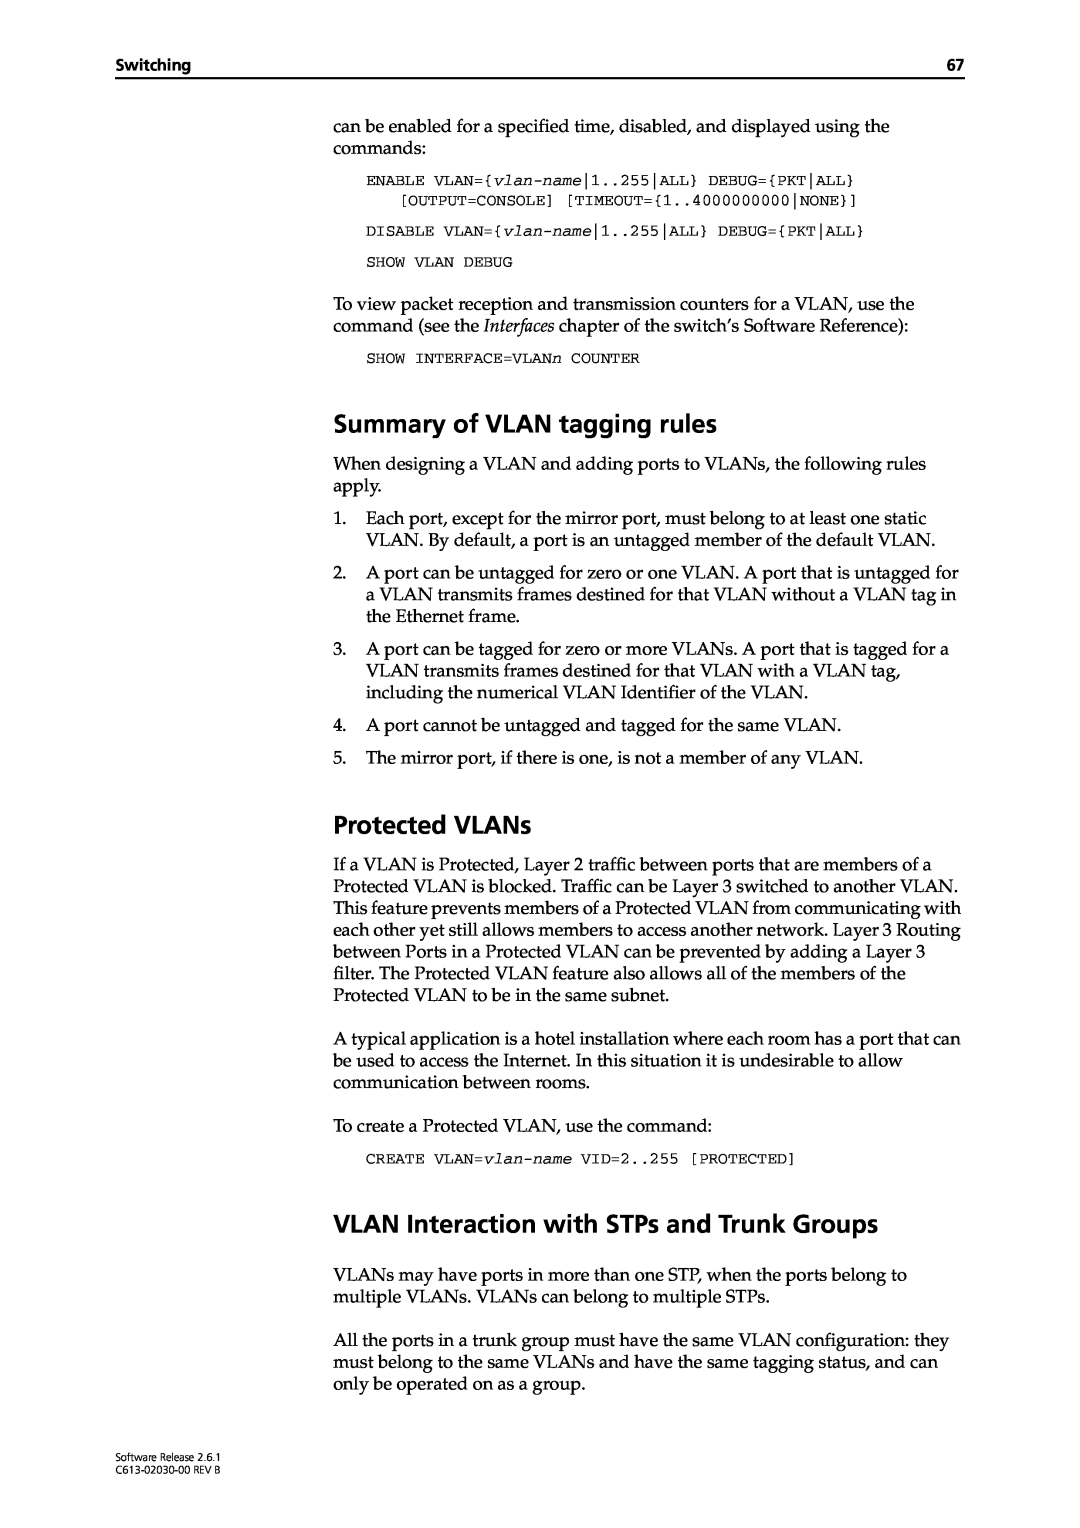 Allied Telesis at-8700xl series switch manual Summary of VLAN tagging rules, Protected VLANs 